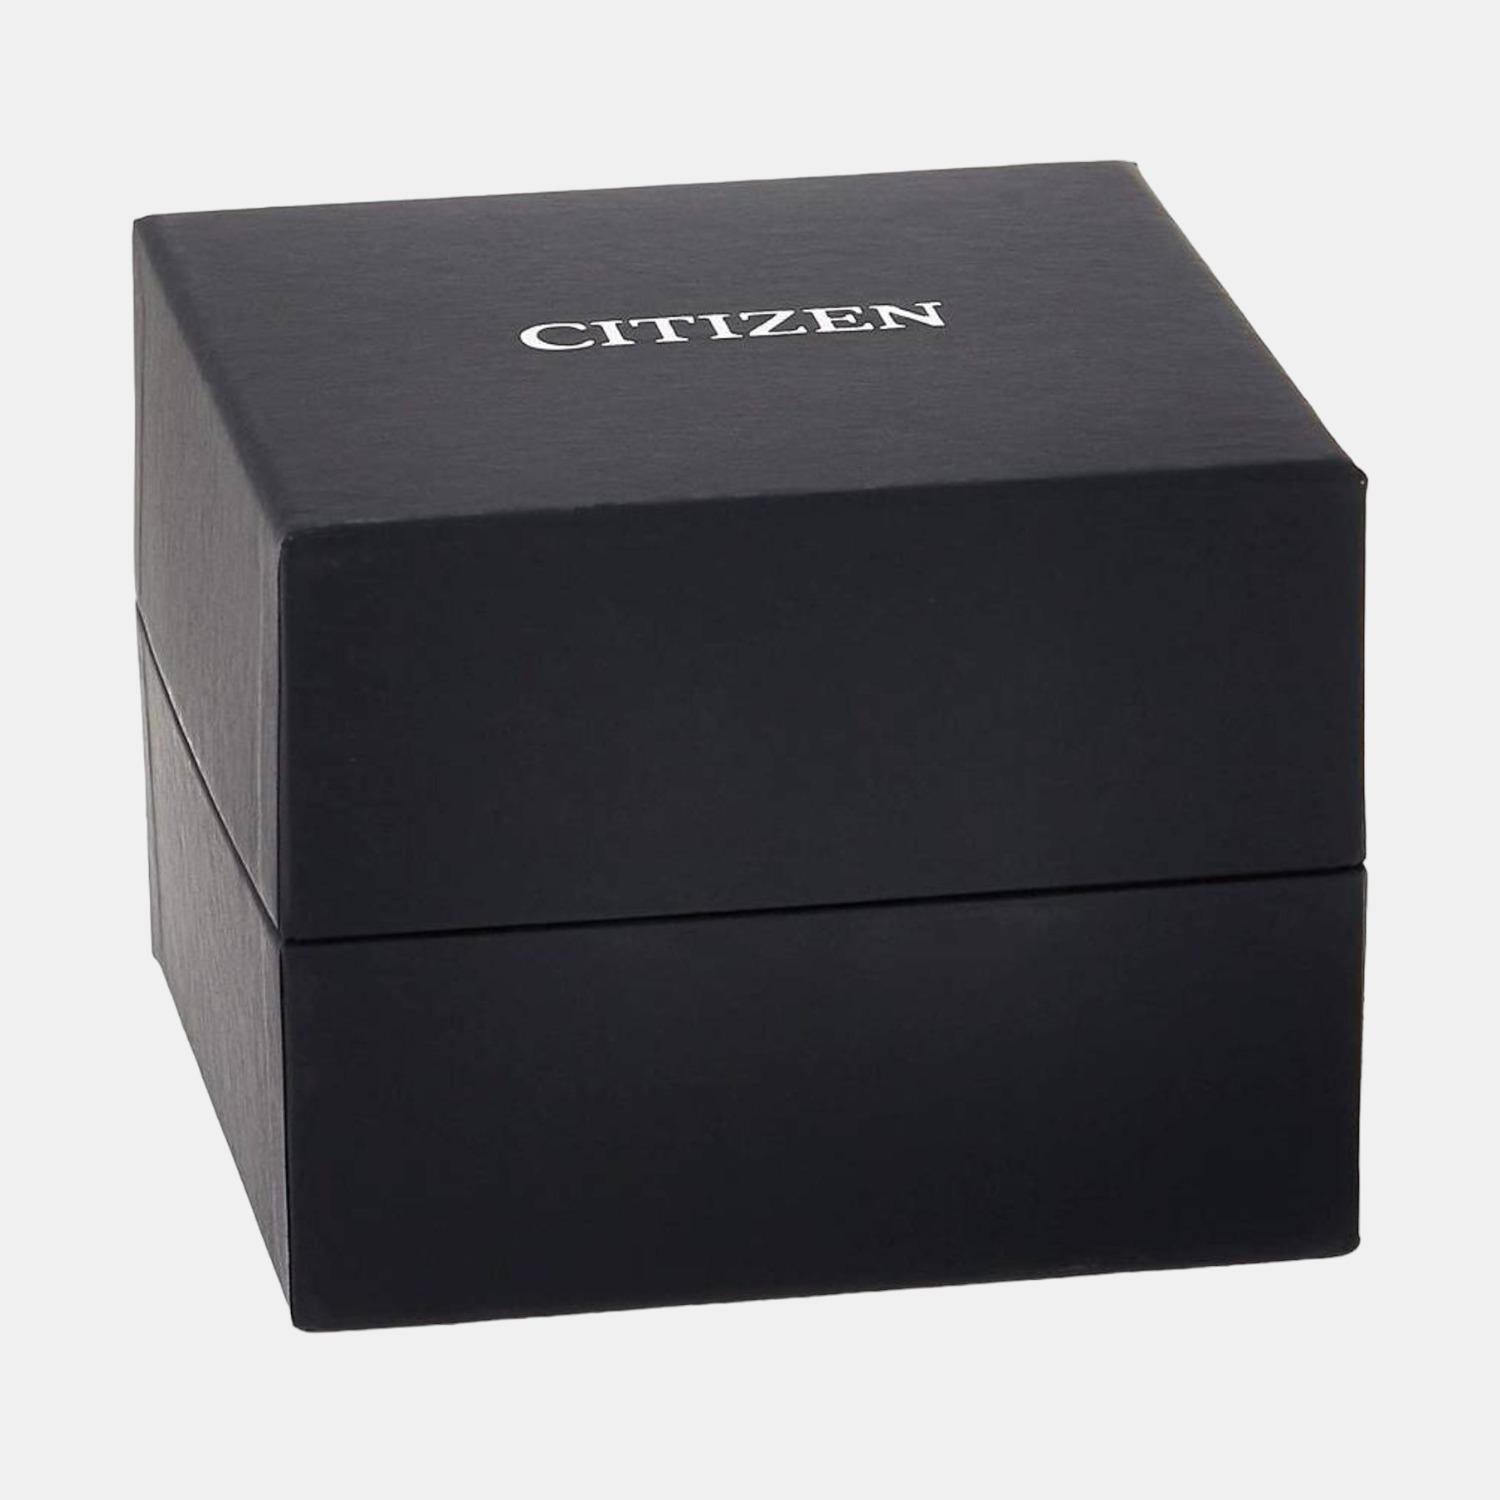 citizen-stainless-steel-black-analog-male-watch-be9187-53e